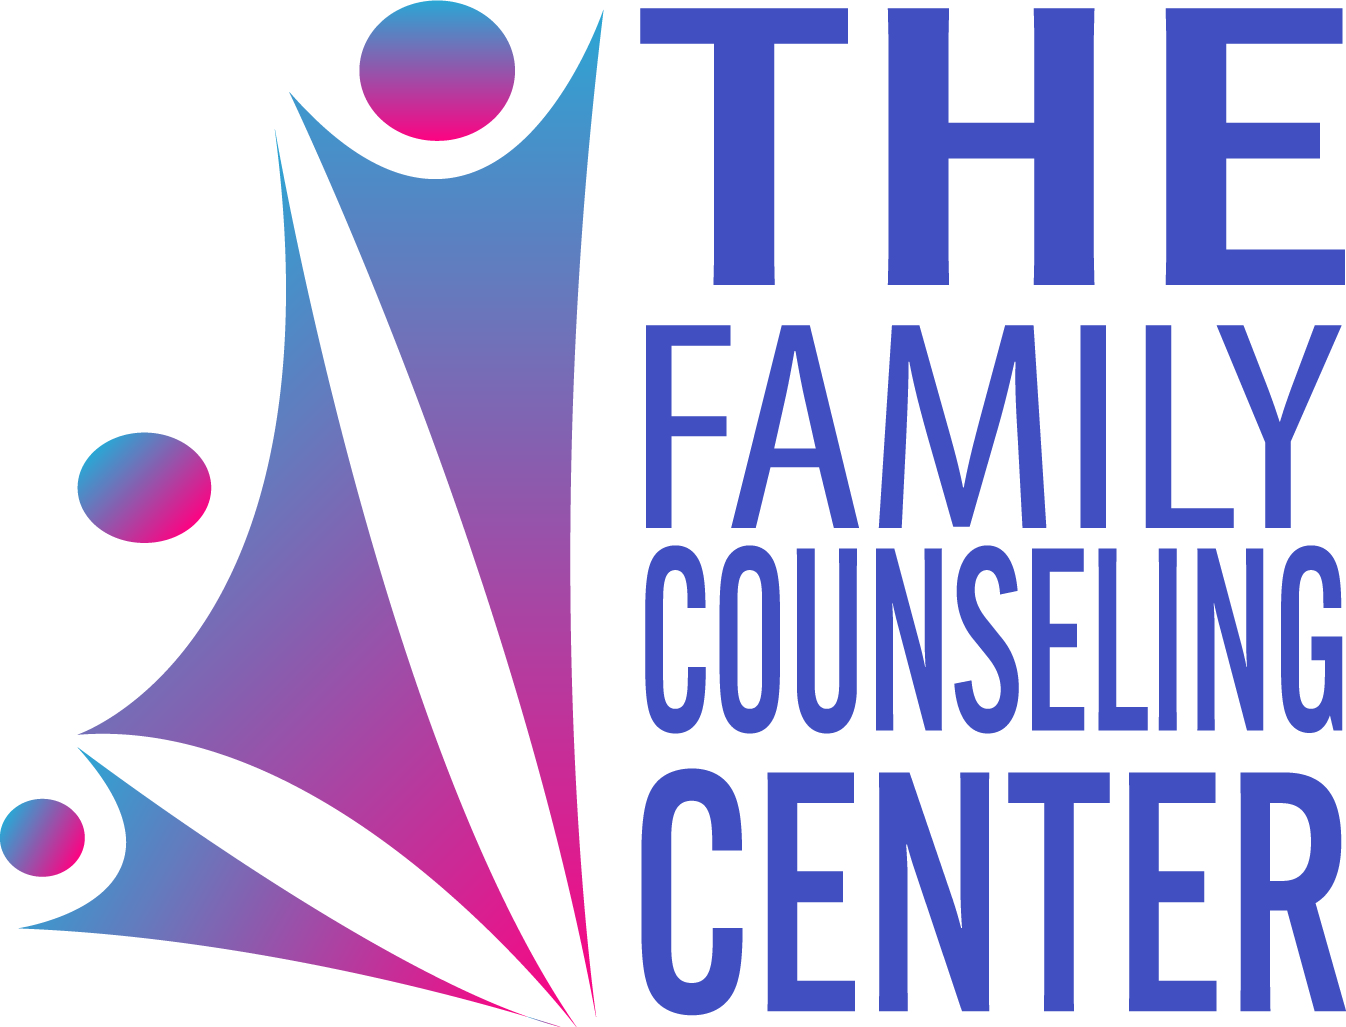 Family Counseling Center